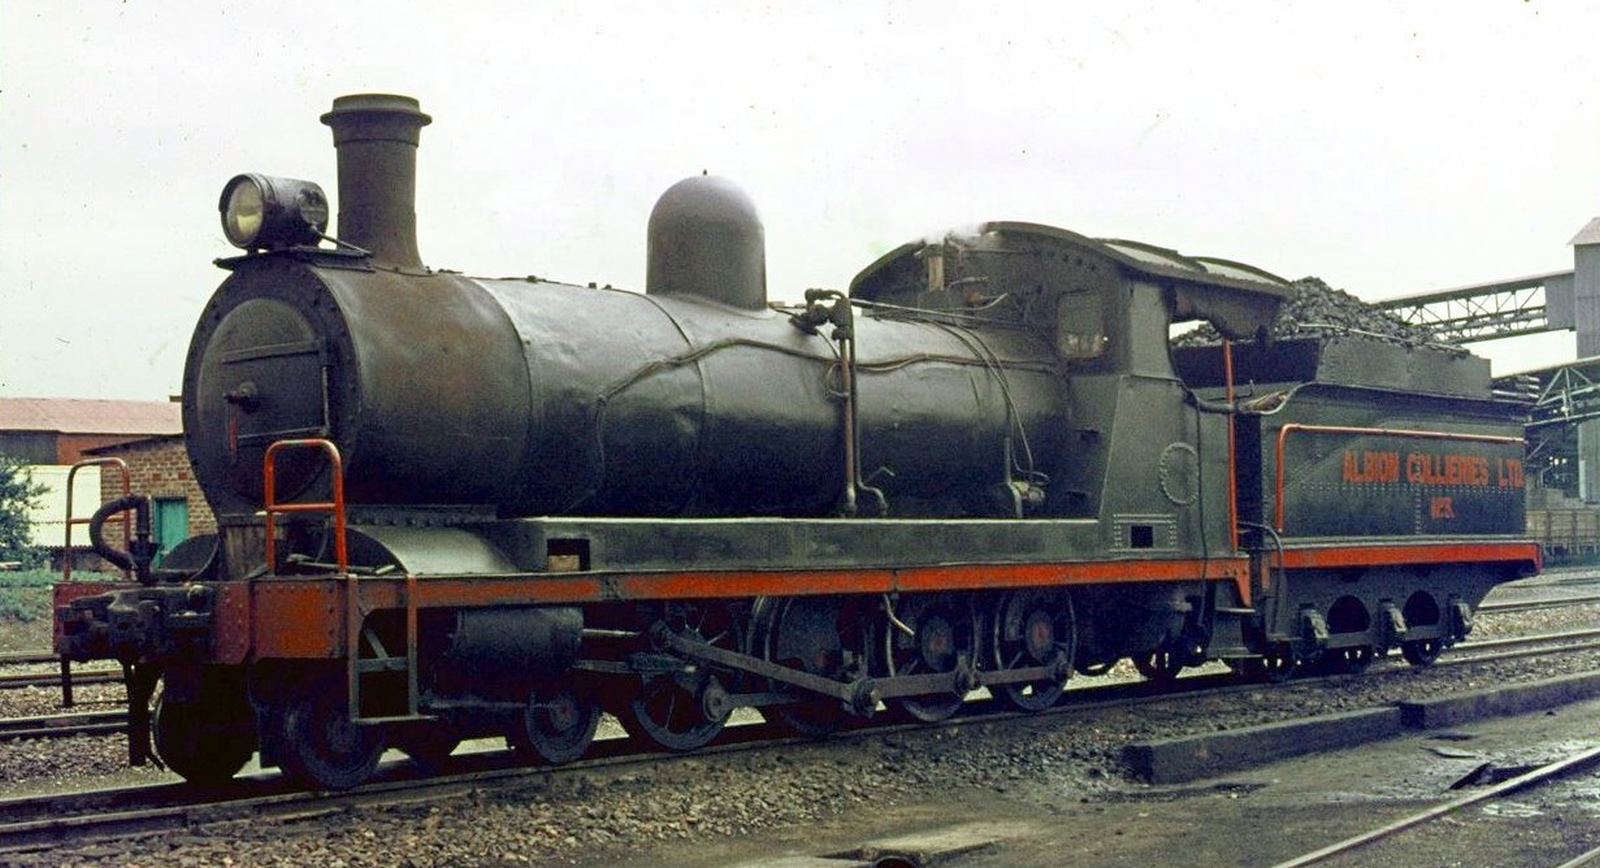 A sample of the former 4-8-0TT without side tanks in November 1974 in the Albion Mines